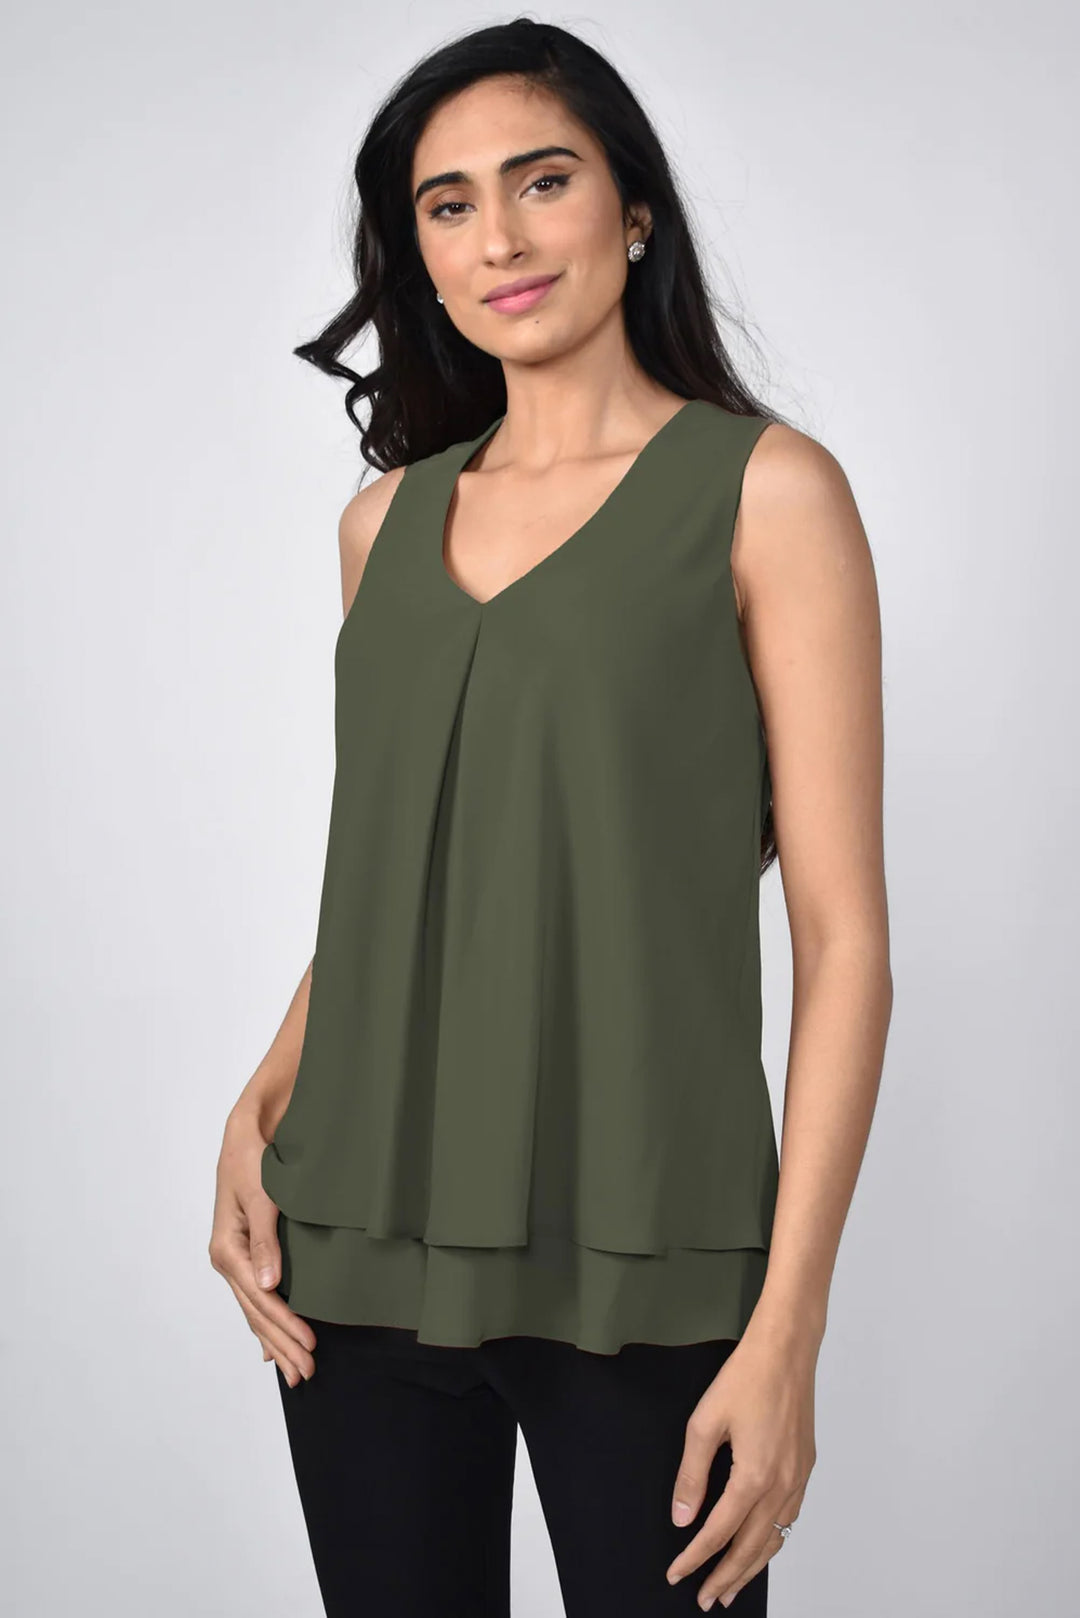 Designed by Frank Lyman this Layered Cami is perfect for adding a flouncy and fashionable touch to any wardrobe. 